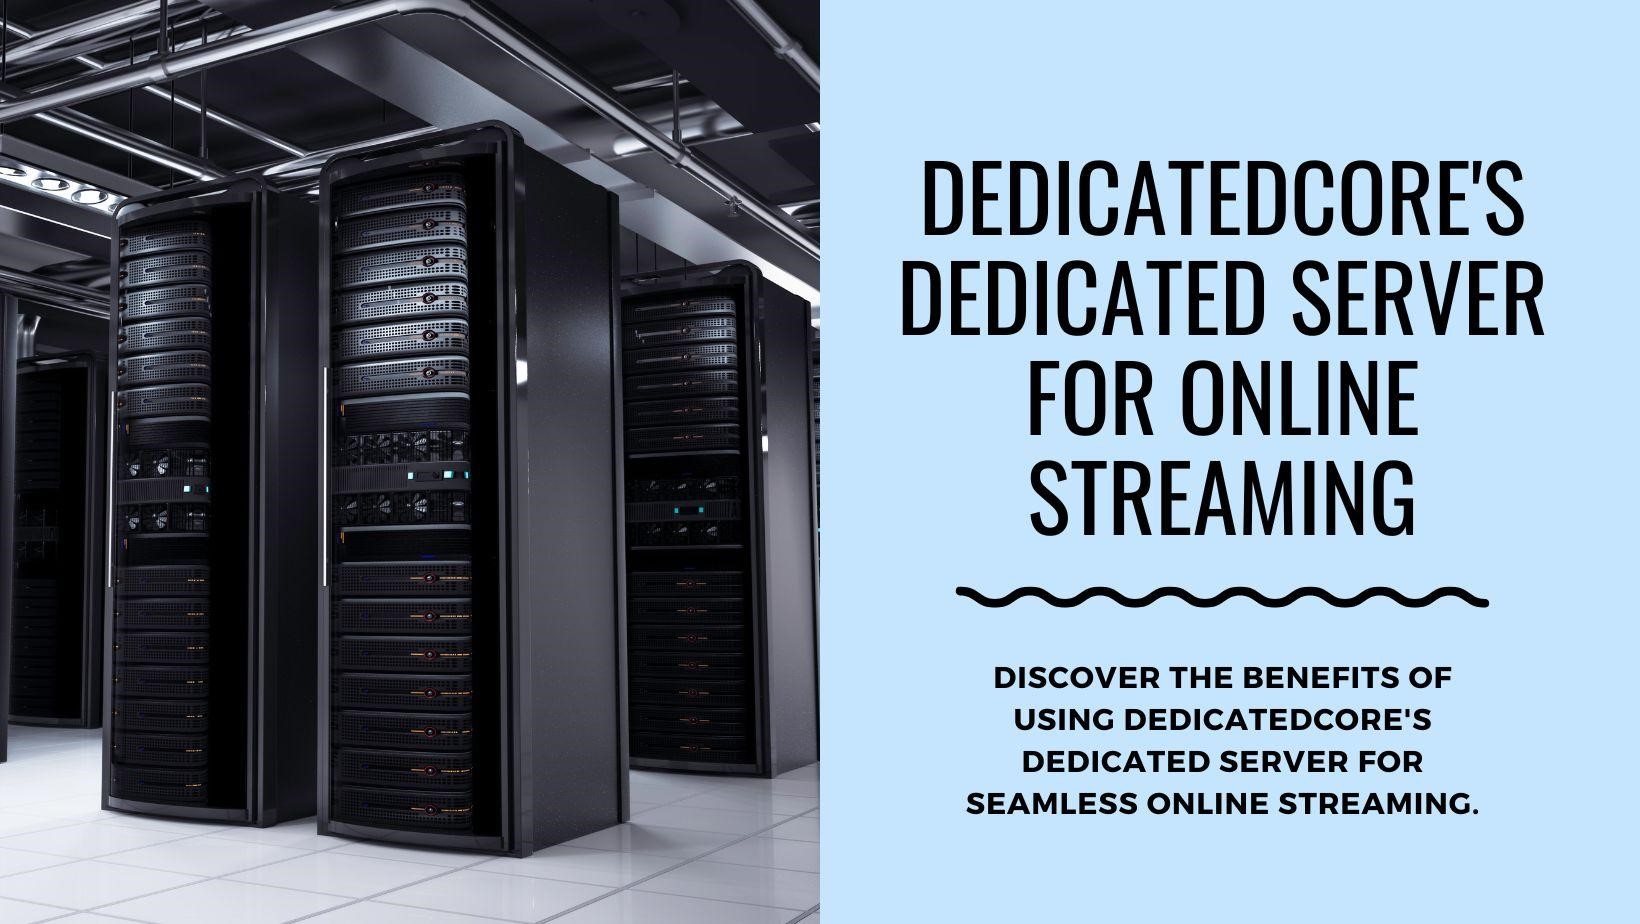 TIs Dedicated Server a Good Choice for Online Streaming